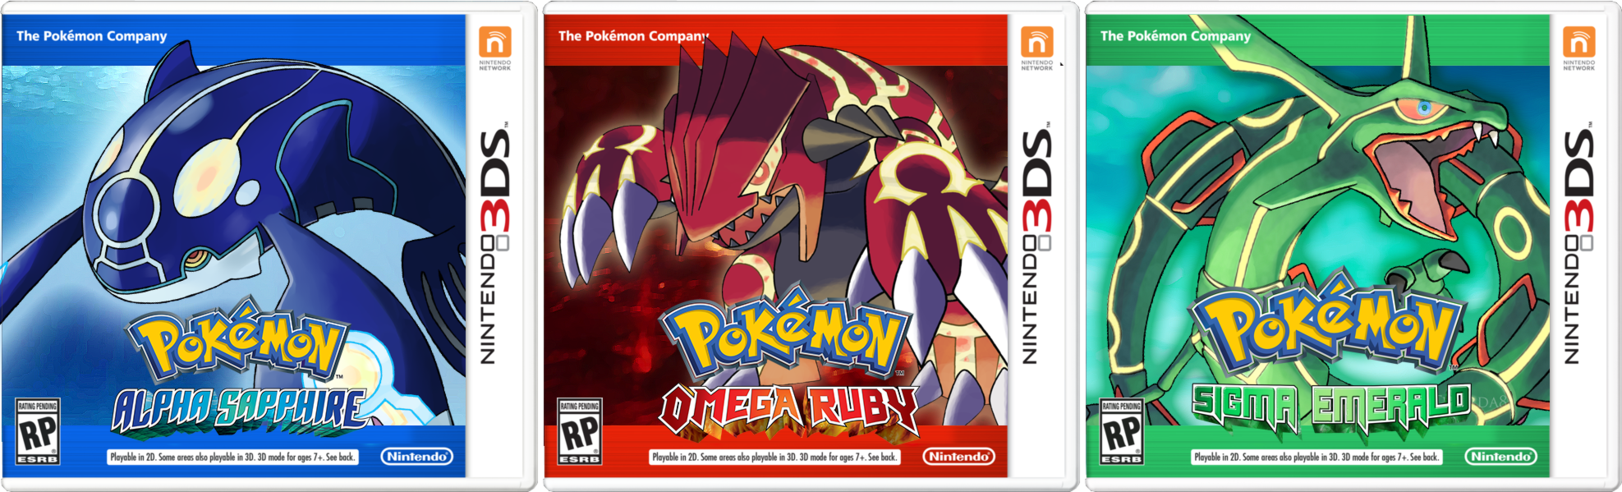 pokemon omega ruby and alpha sapphire background